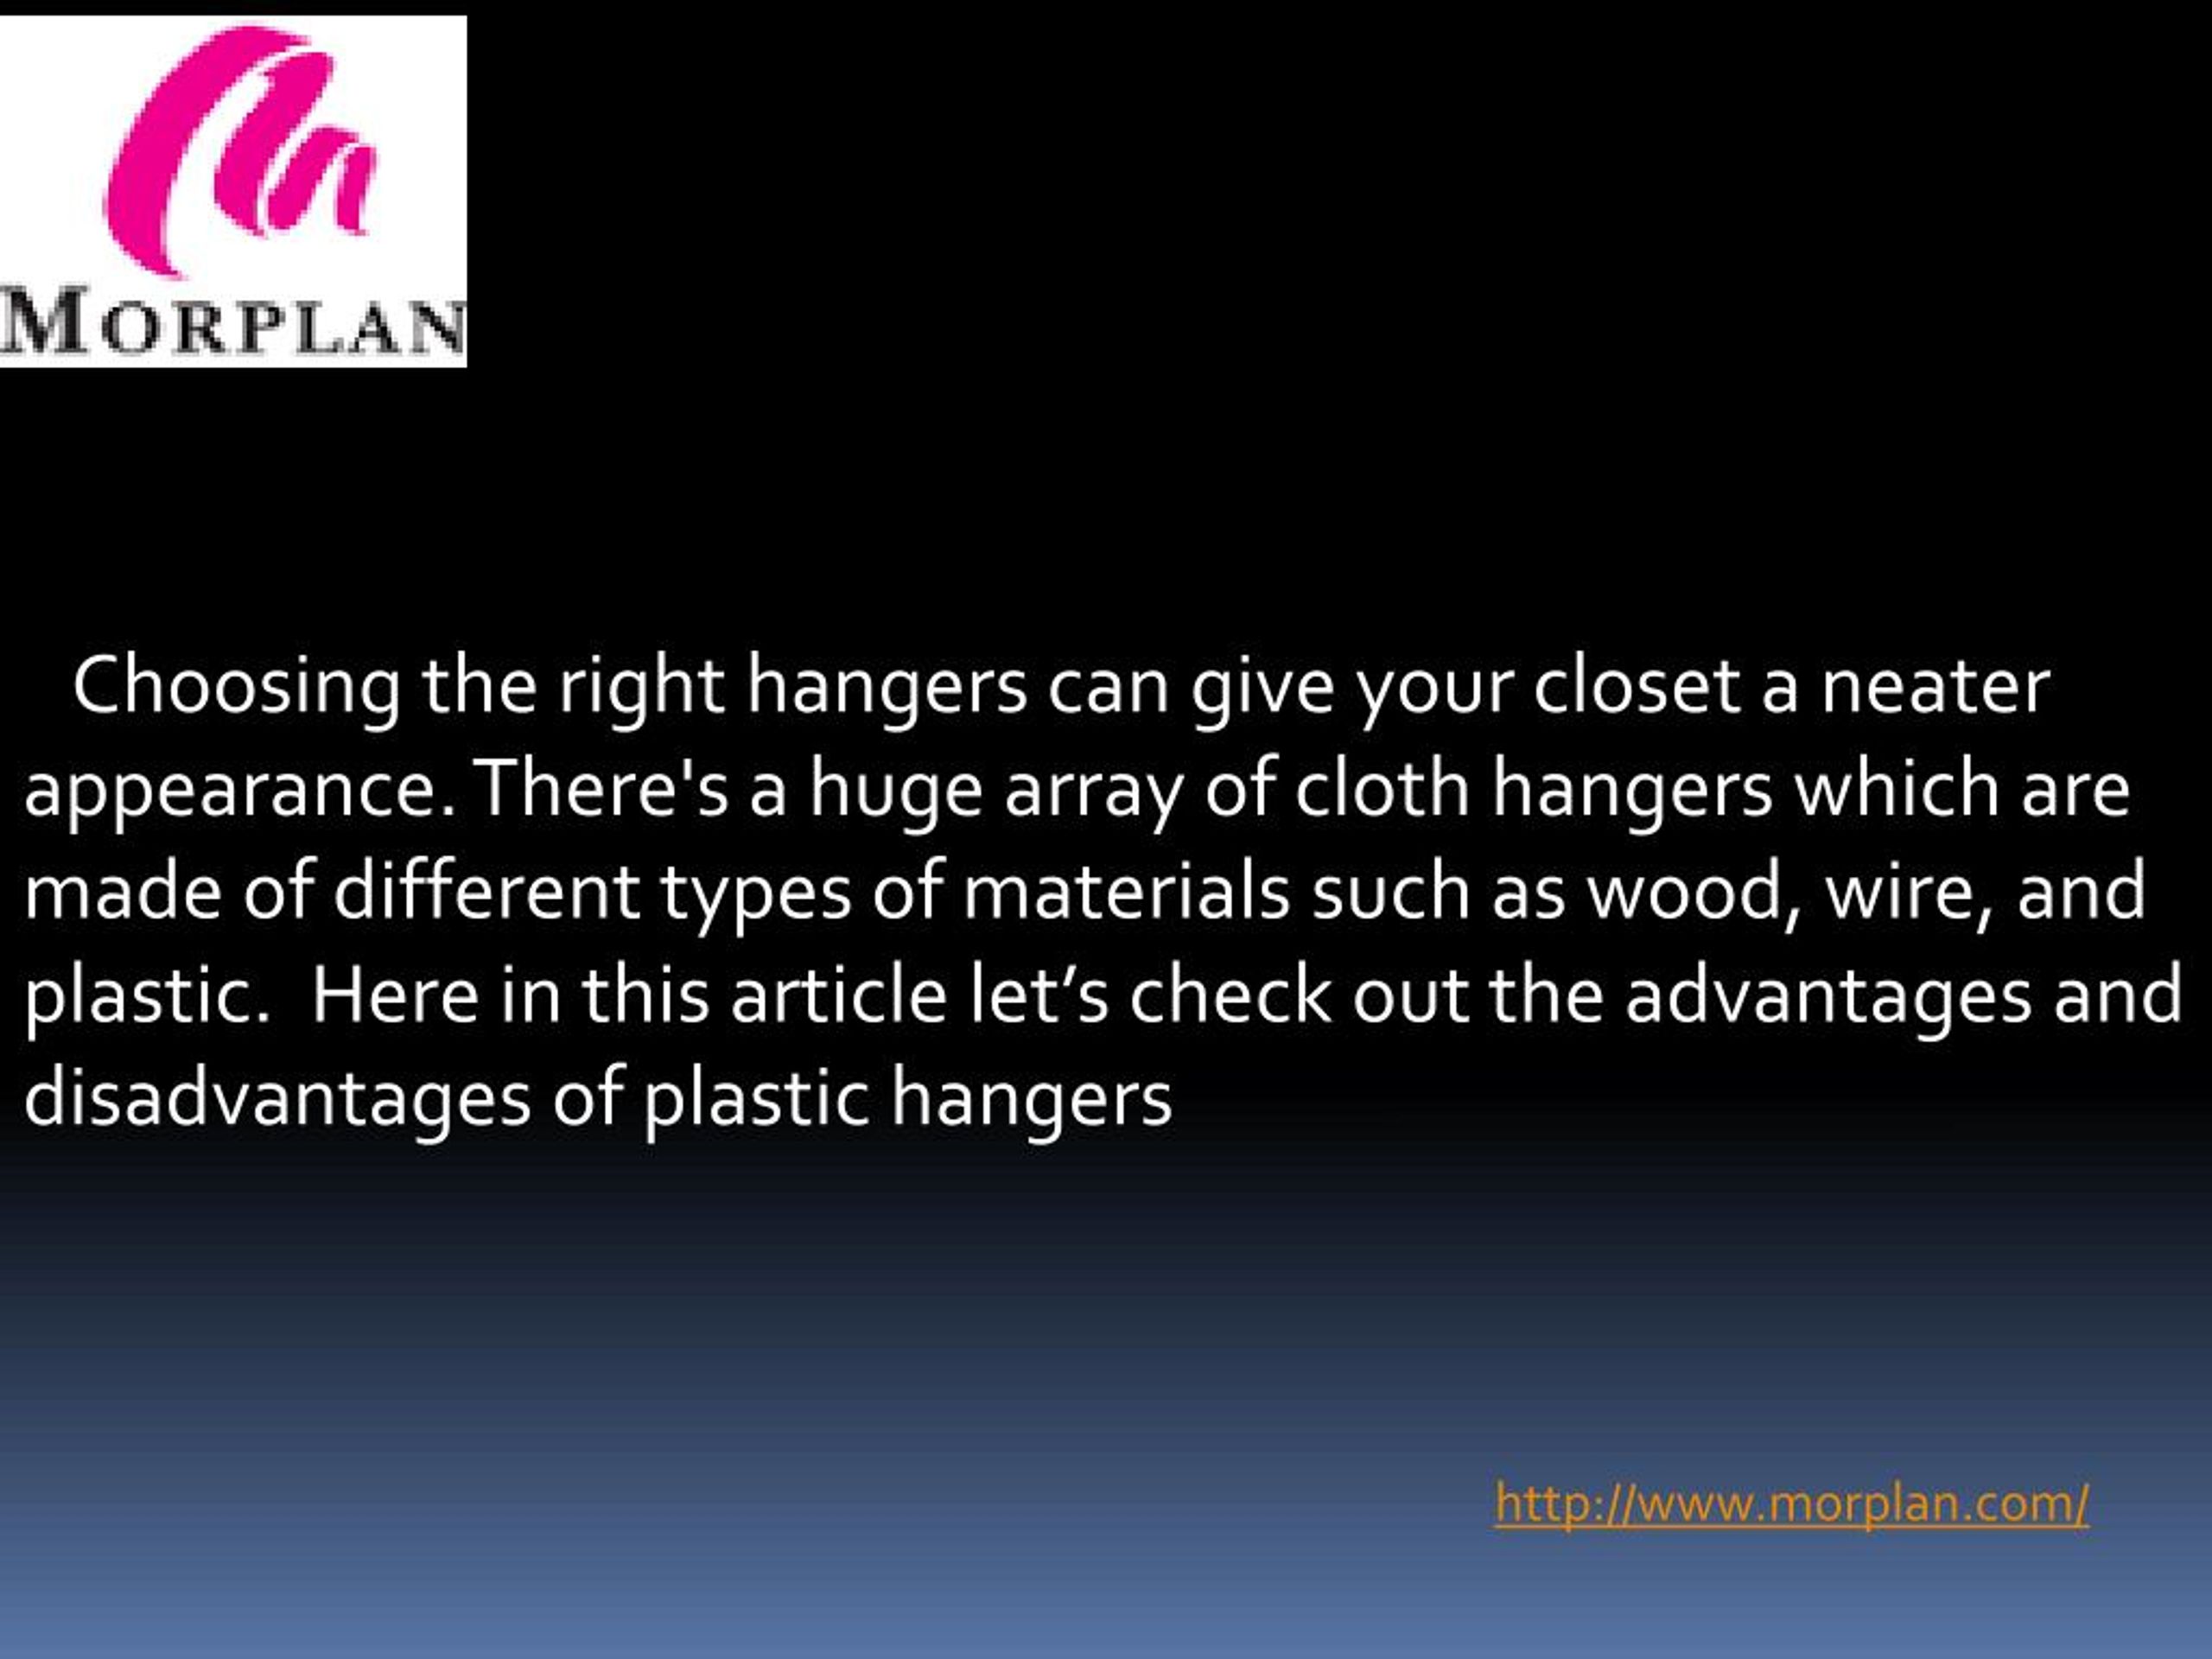 Different Types of Hangers _ advantages and disadvantages